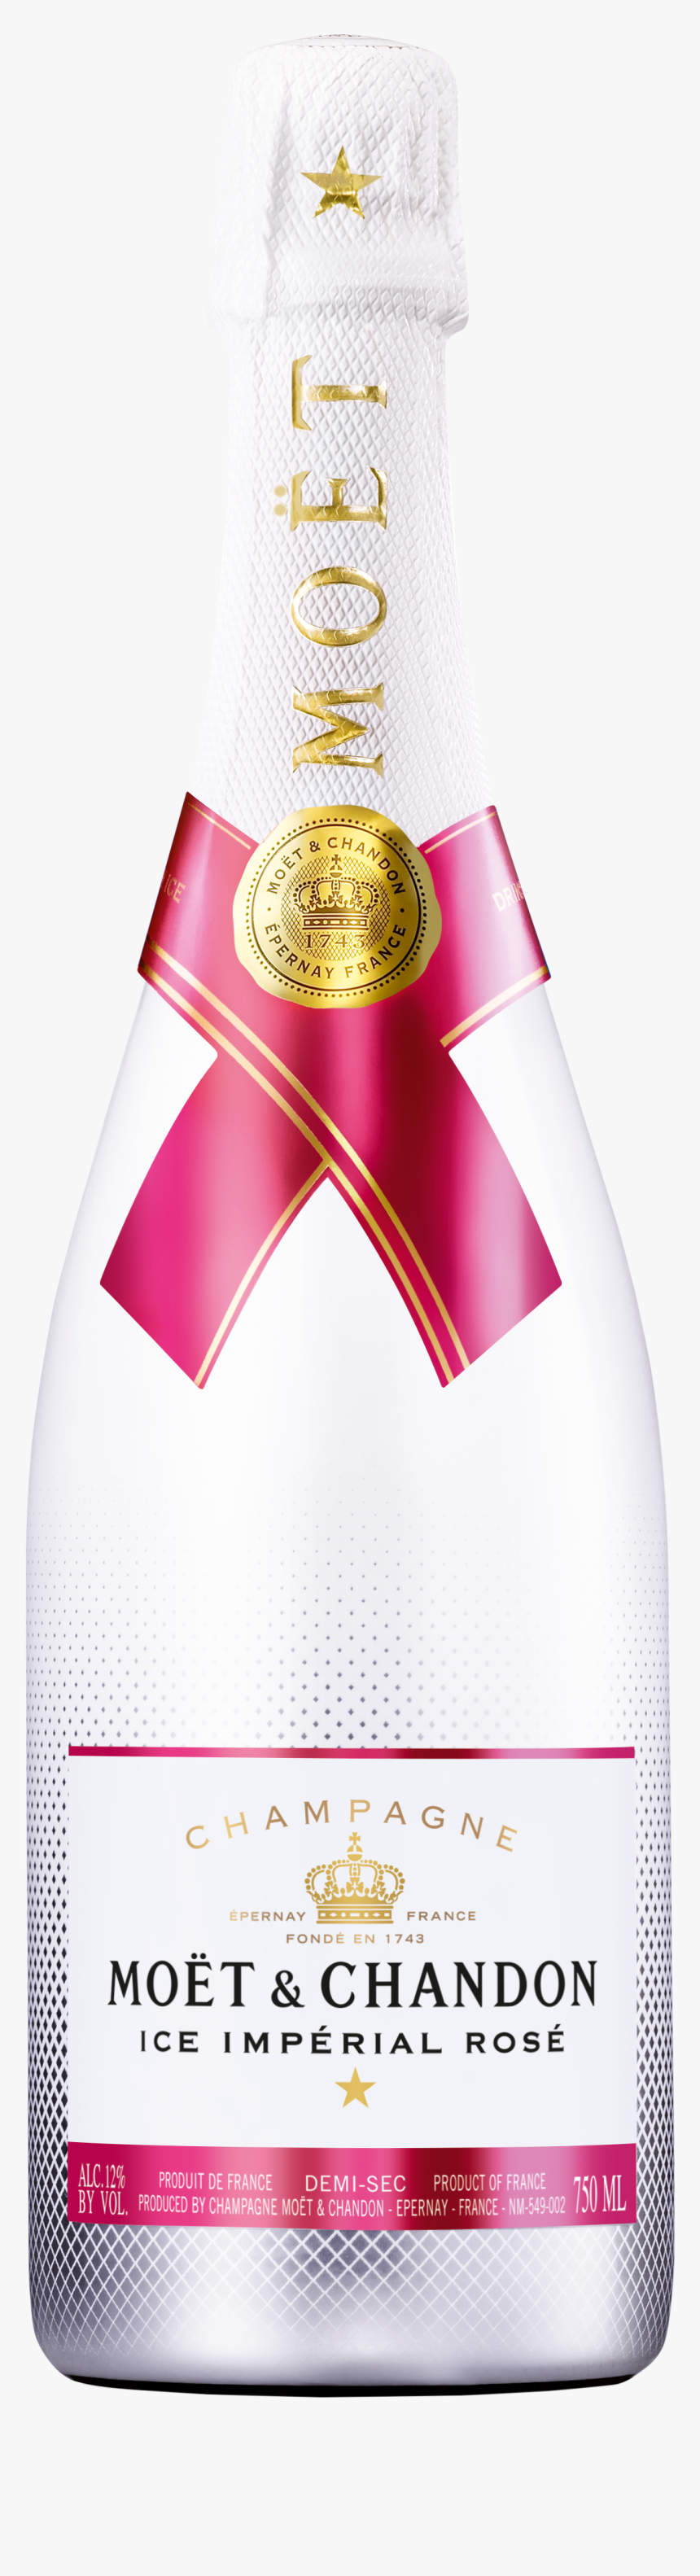 Moe%cc%88t Ice Imperial Rose - Moet & Chandon, HD Png Download, Free Download